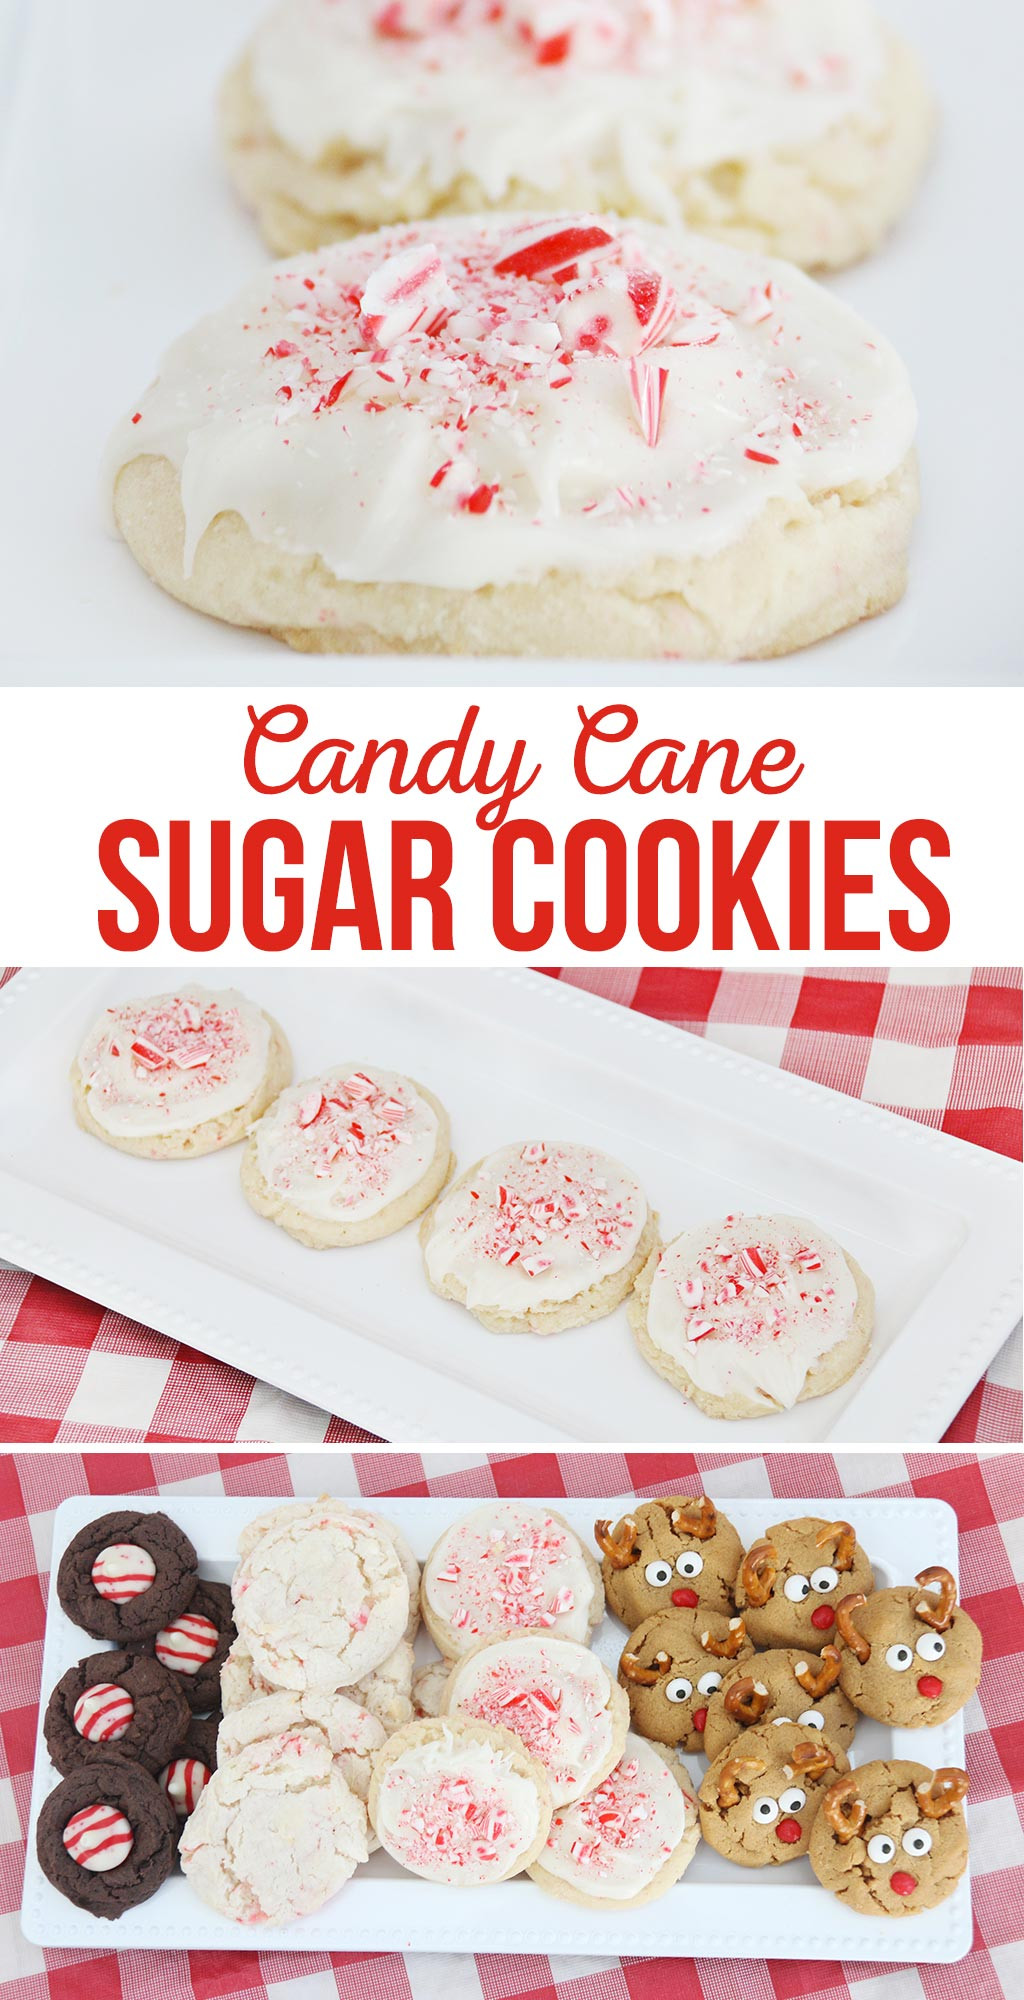 Candy Cane Sugar Cookies
 Candy Cane Sugar Cookies The Crafting Chicks